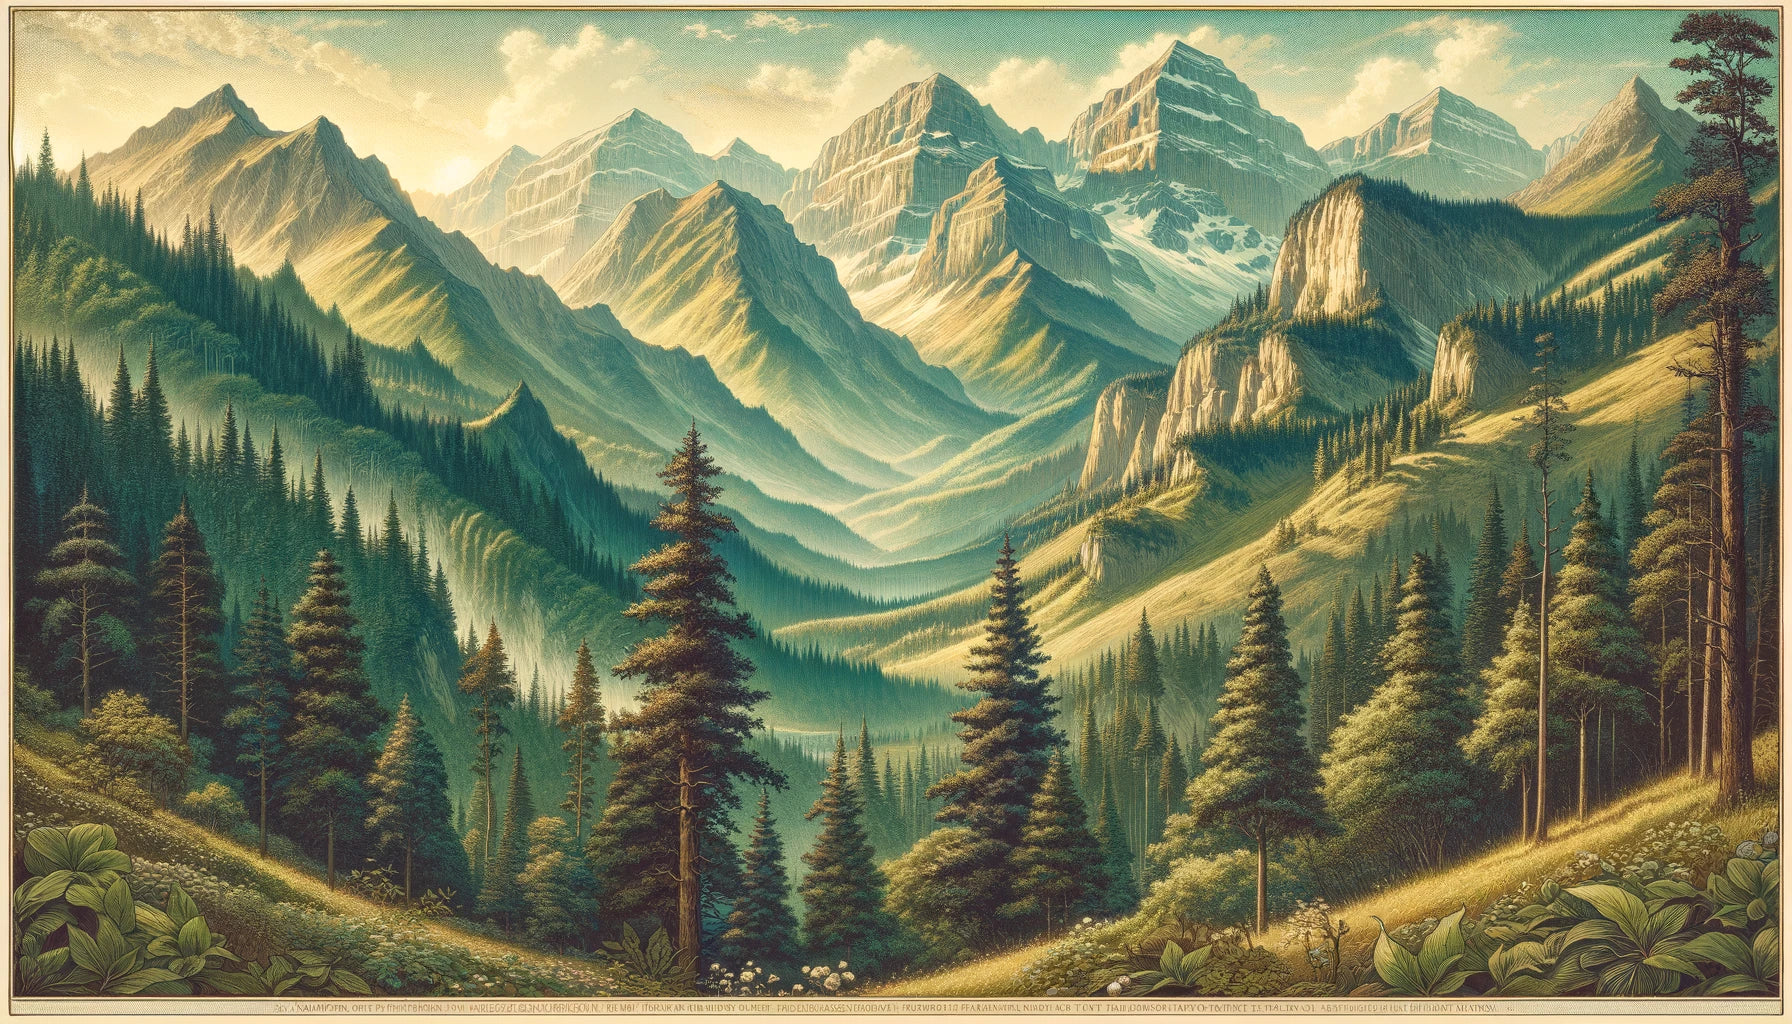 Colorado Rockies Landscape: An enchanting landscape of the Colorado Rockies, capturing the rugged, wild beauty of the mountains, setting the mood for the folklore-inspired Slide Rock Bolter Tea.